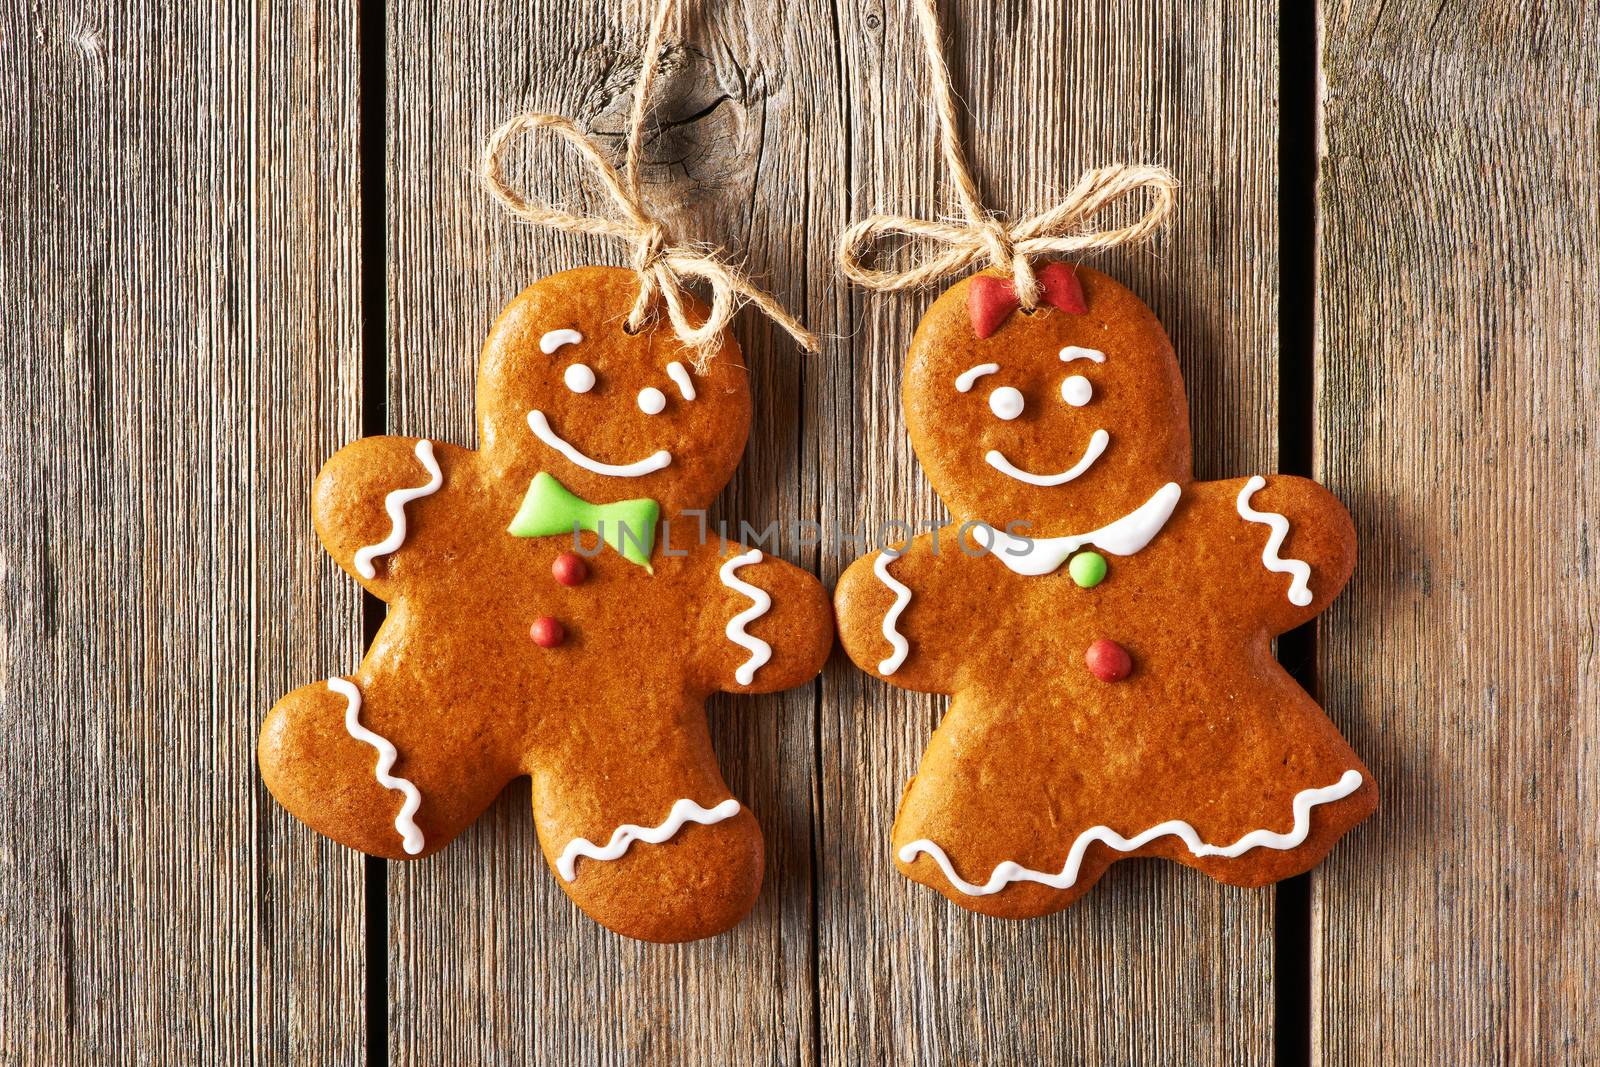 Christmas homemade gingerbread couple cookies by haveseen